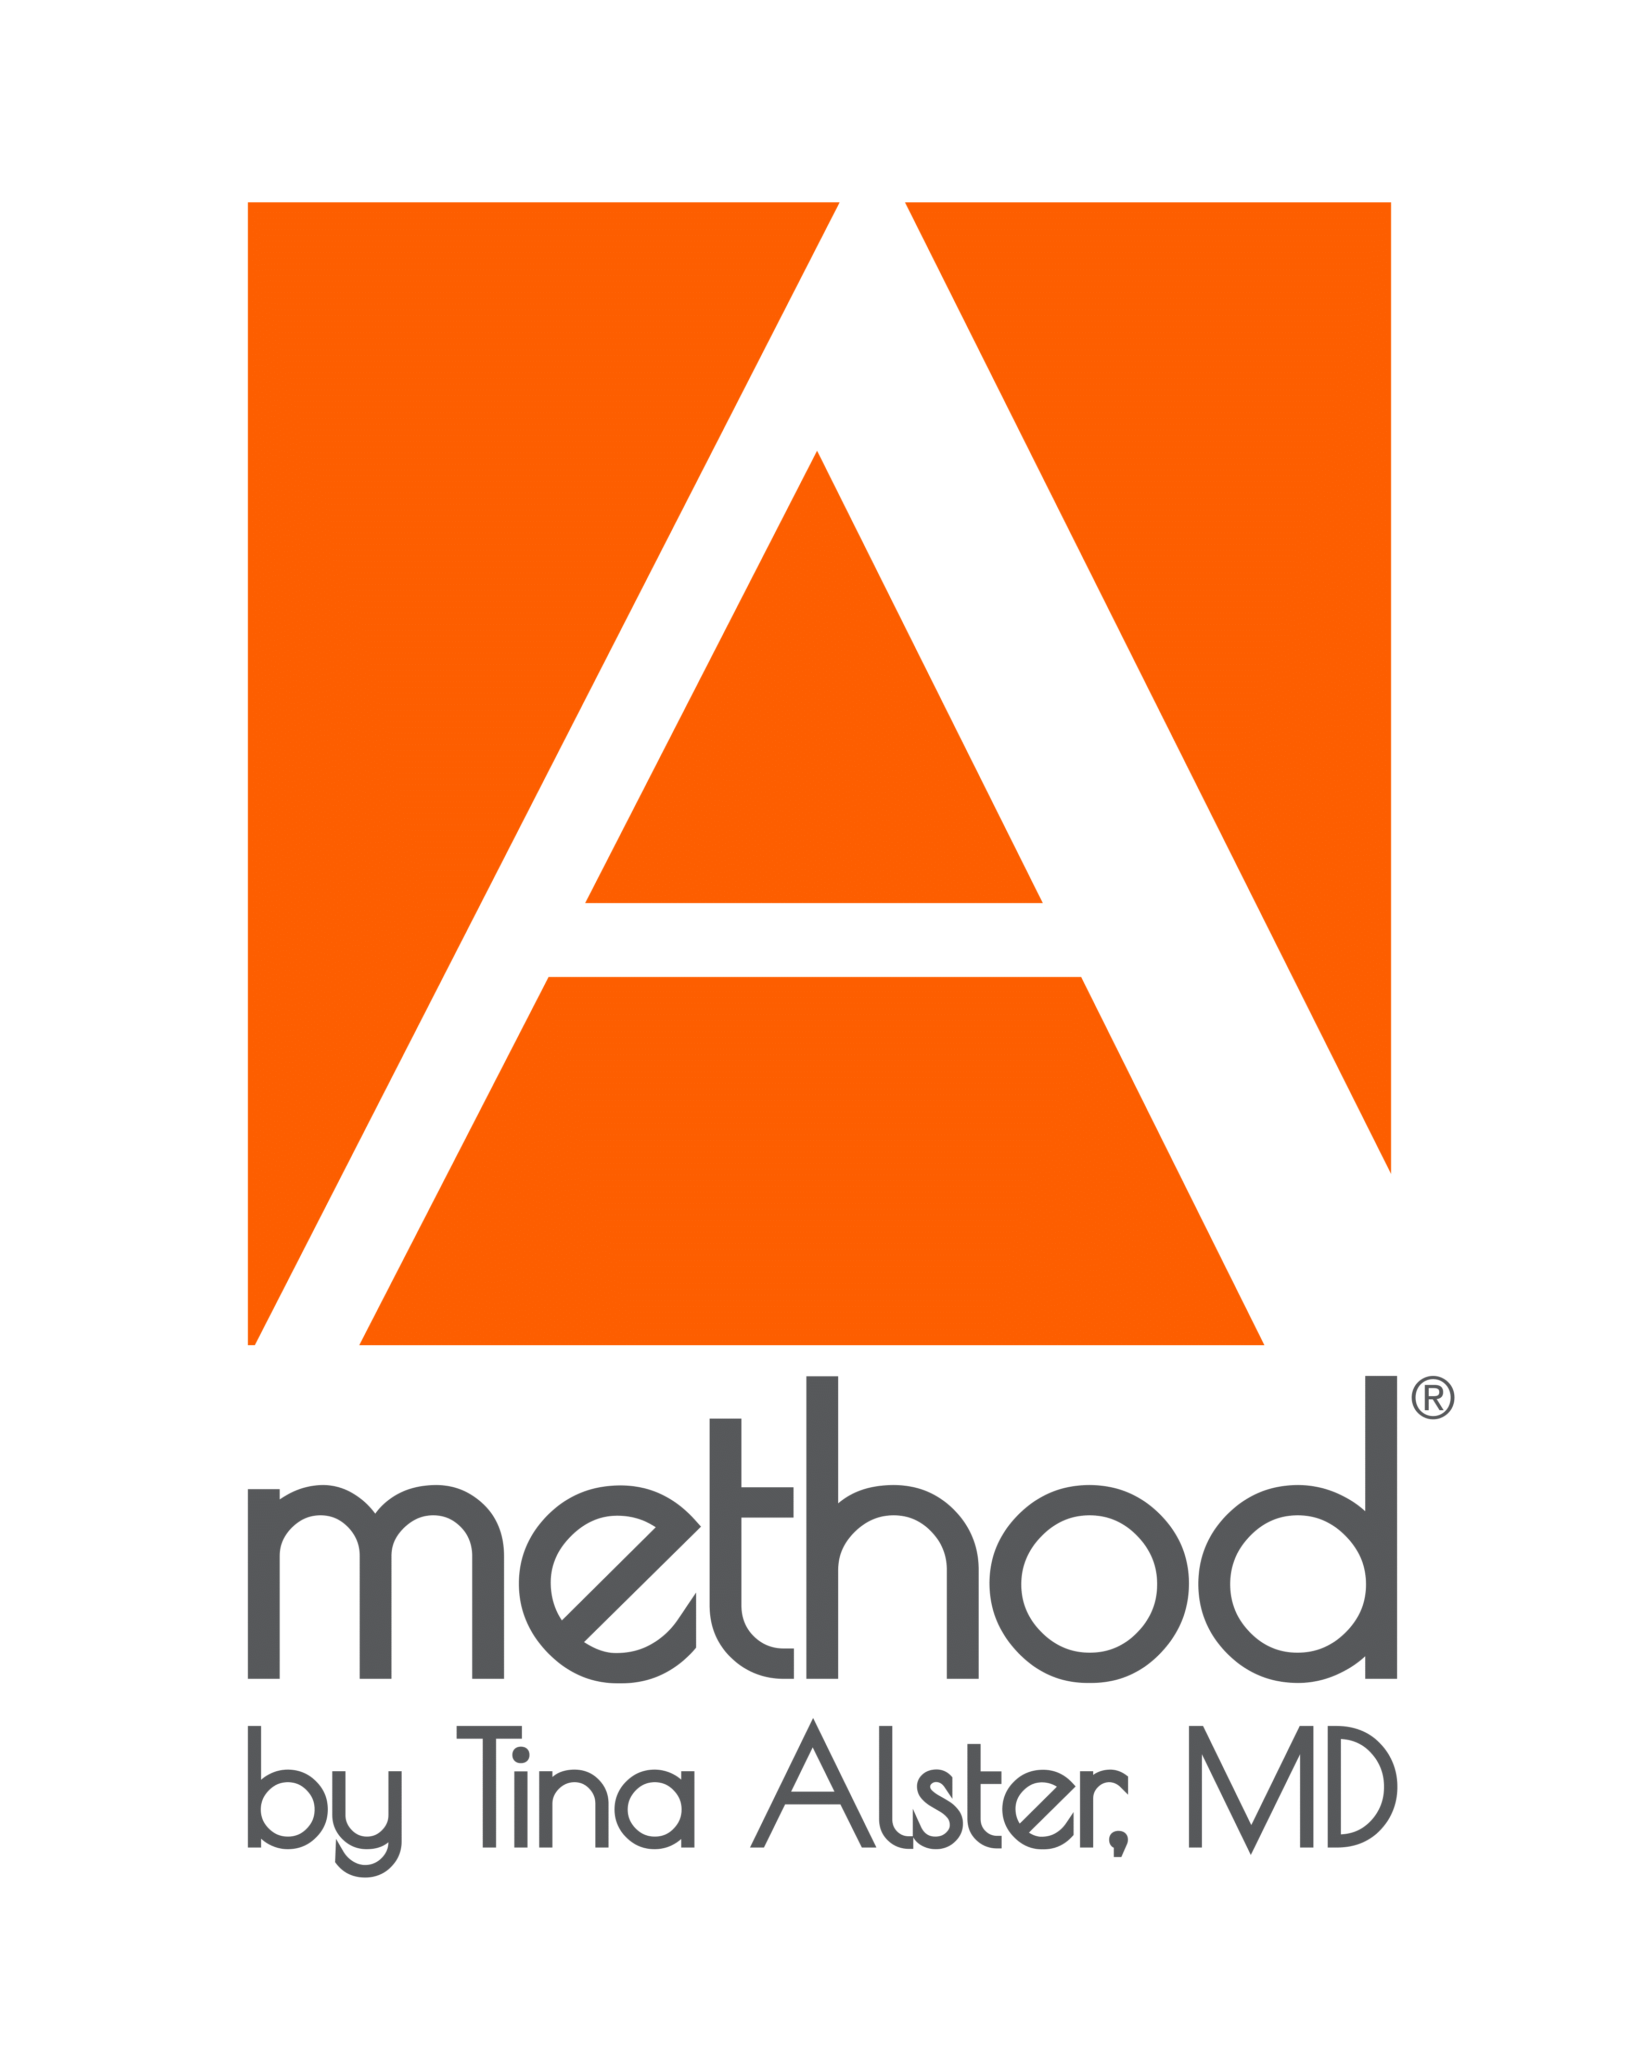 The A Method Coupon Codes